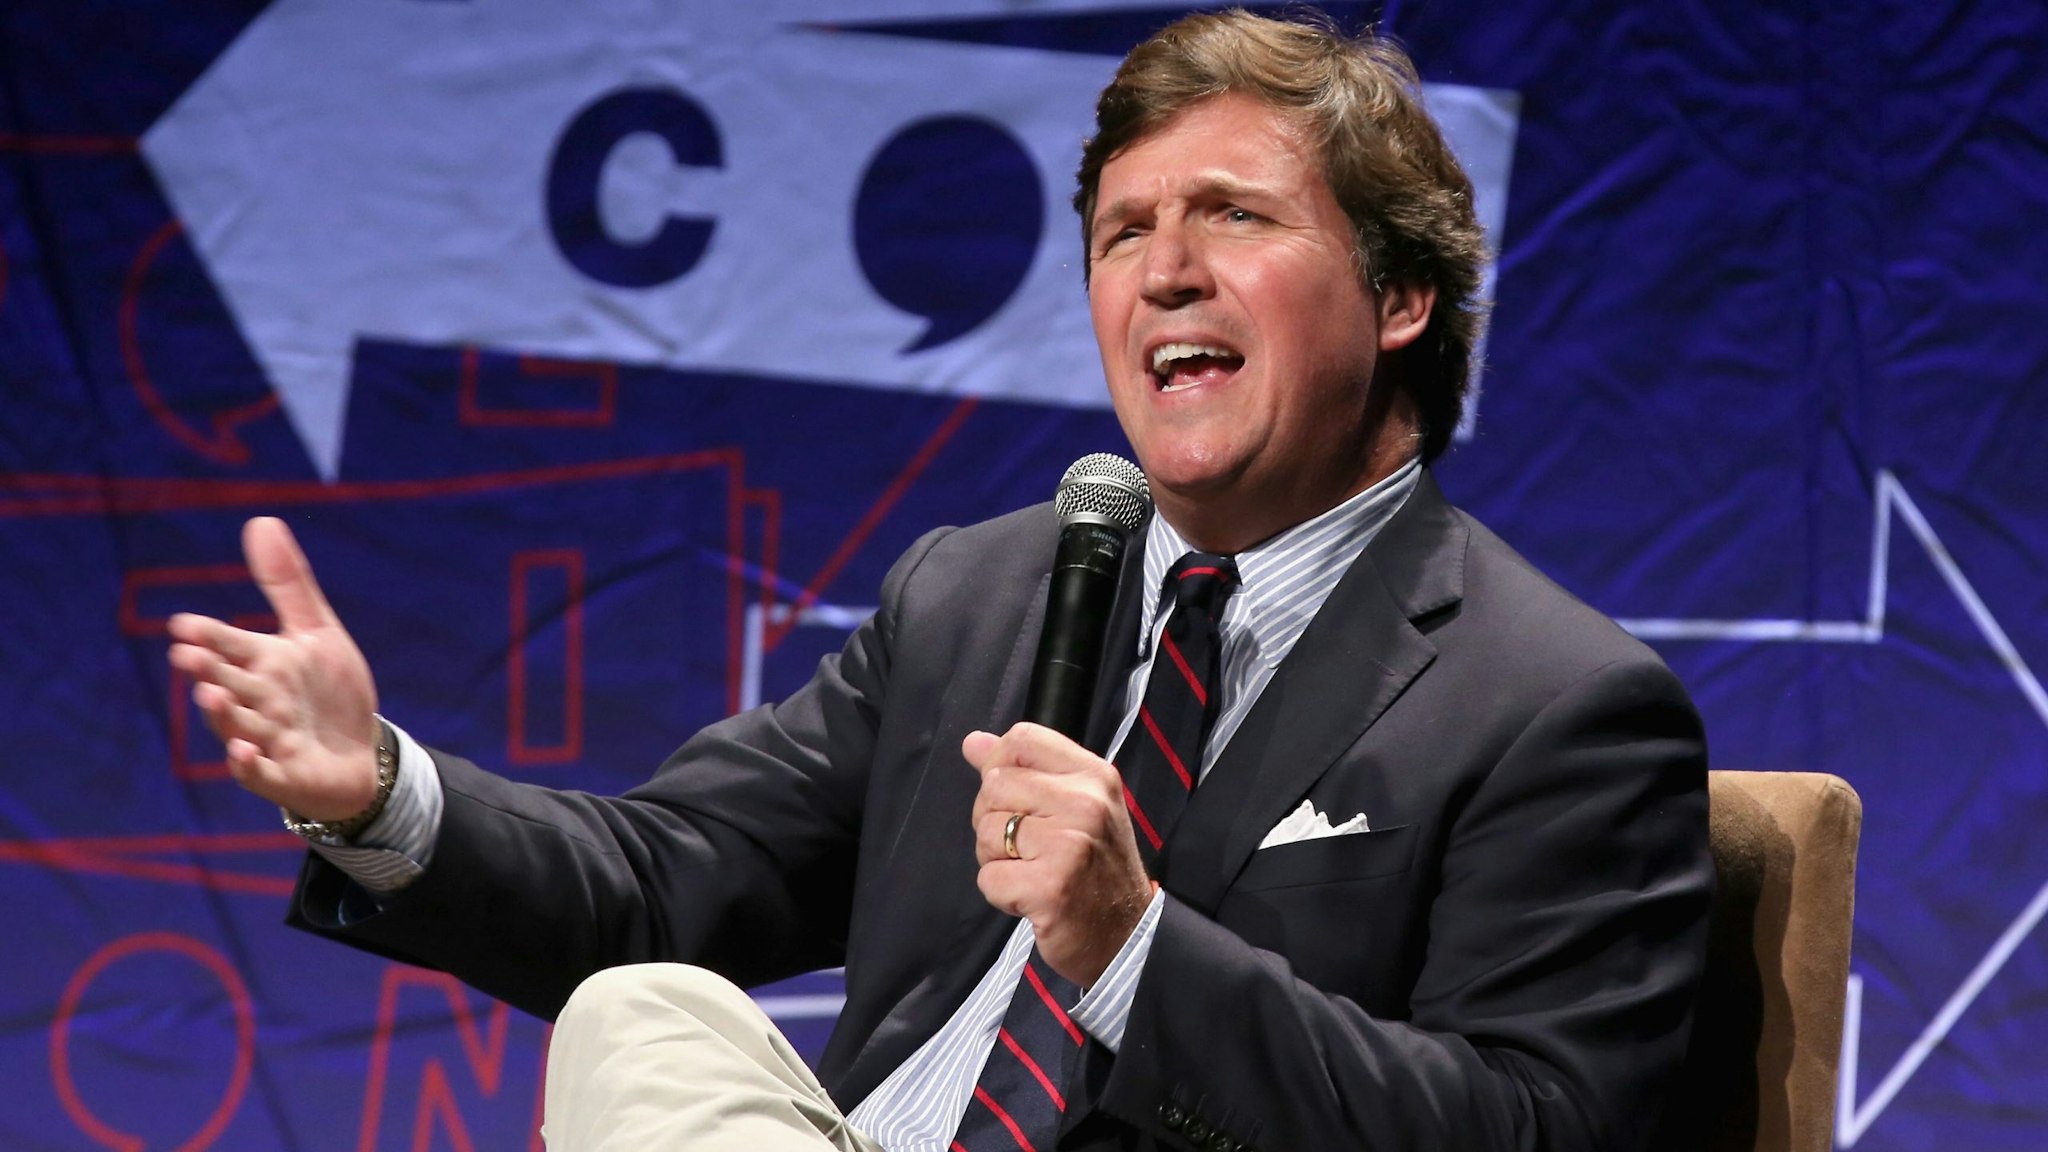 LOS ANGELES, CA - OCTOBER 21: Tucker Carlson speaks onstage during Politicon 2018 at Los Angeles Convention Center on October 21, 2018 in Los Angeles, California.